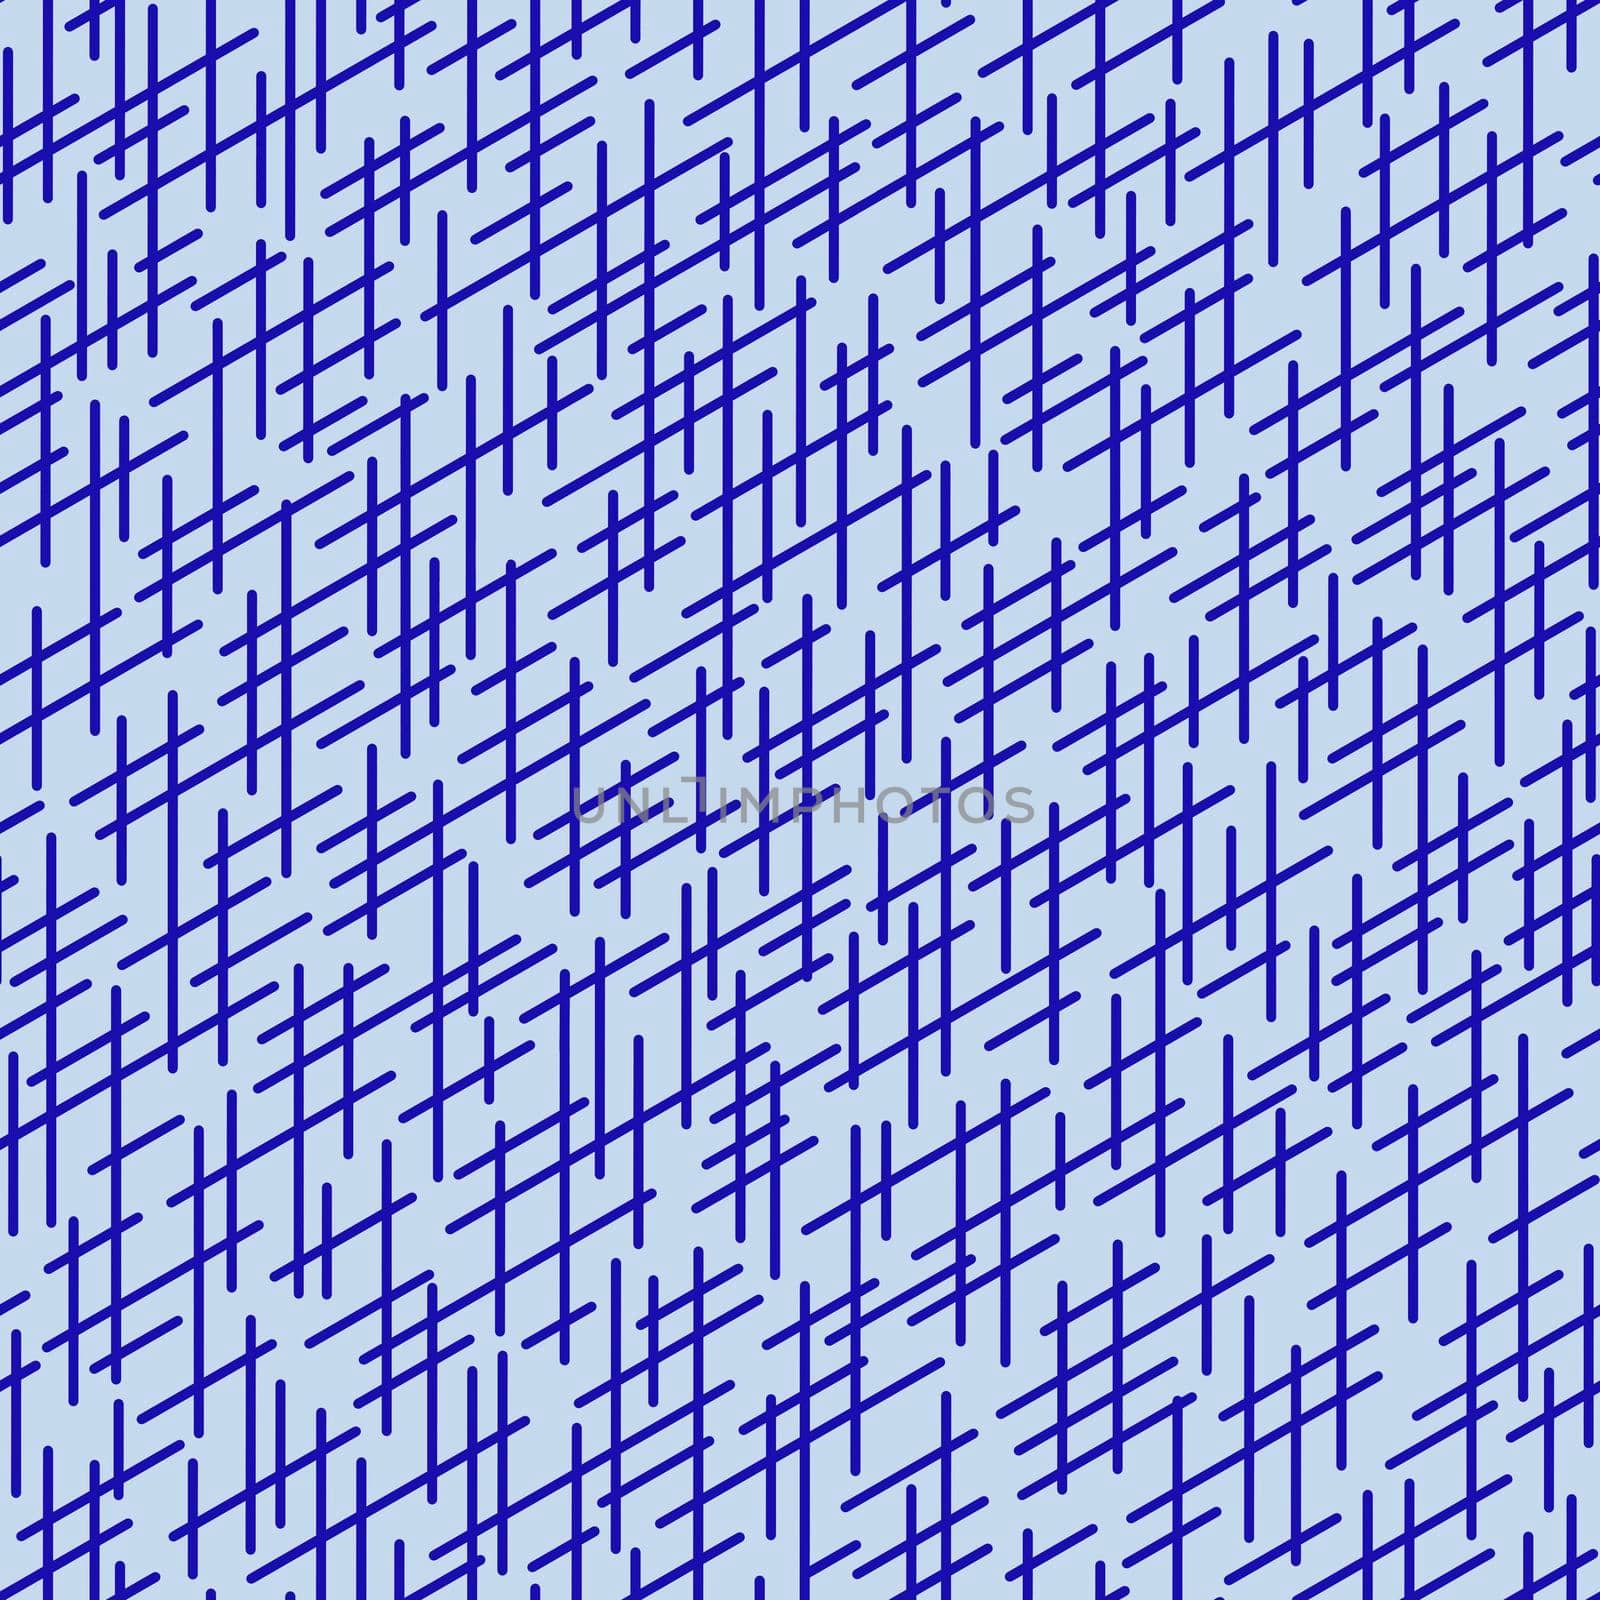 Randomly crossing lines making pattern.Chaotic short lines seamless pattern,chips and sticks modern repeatable motif.Good for print, textile,fabric, background, wrapping paper.Azure blue colors by Angelsmoon